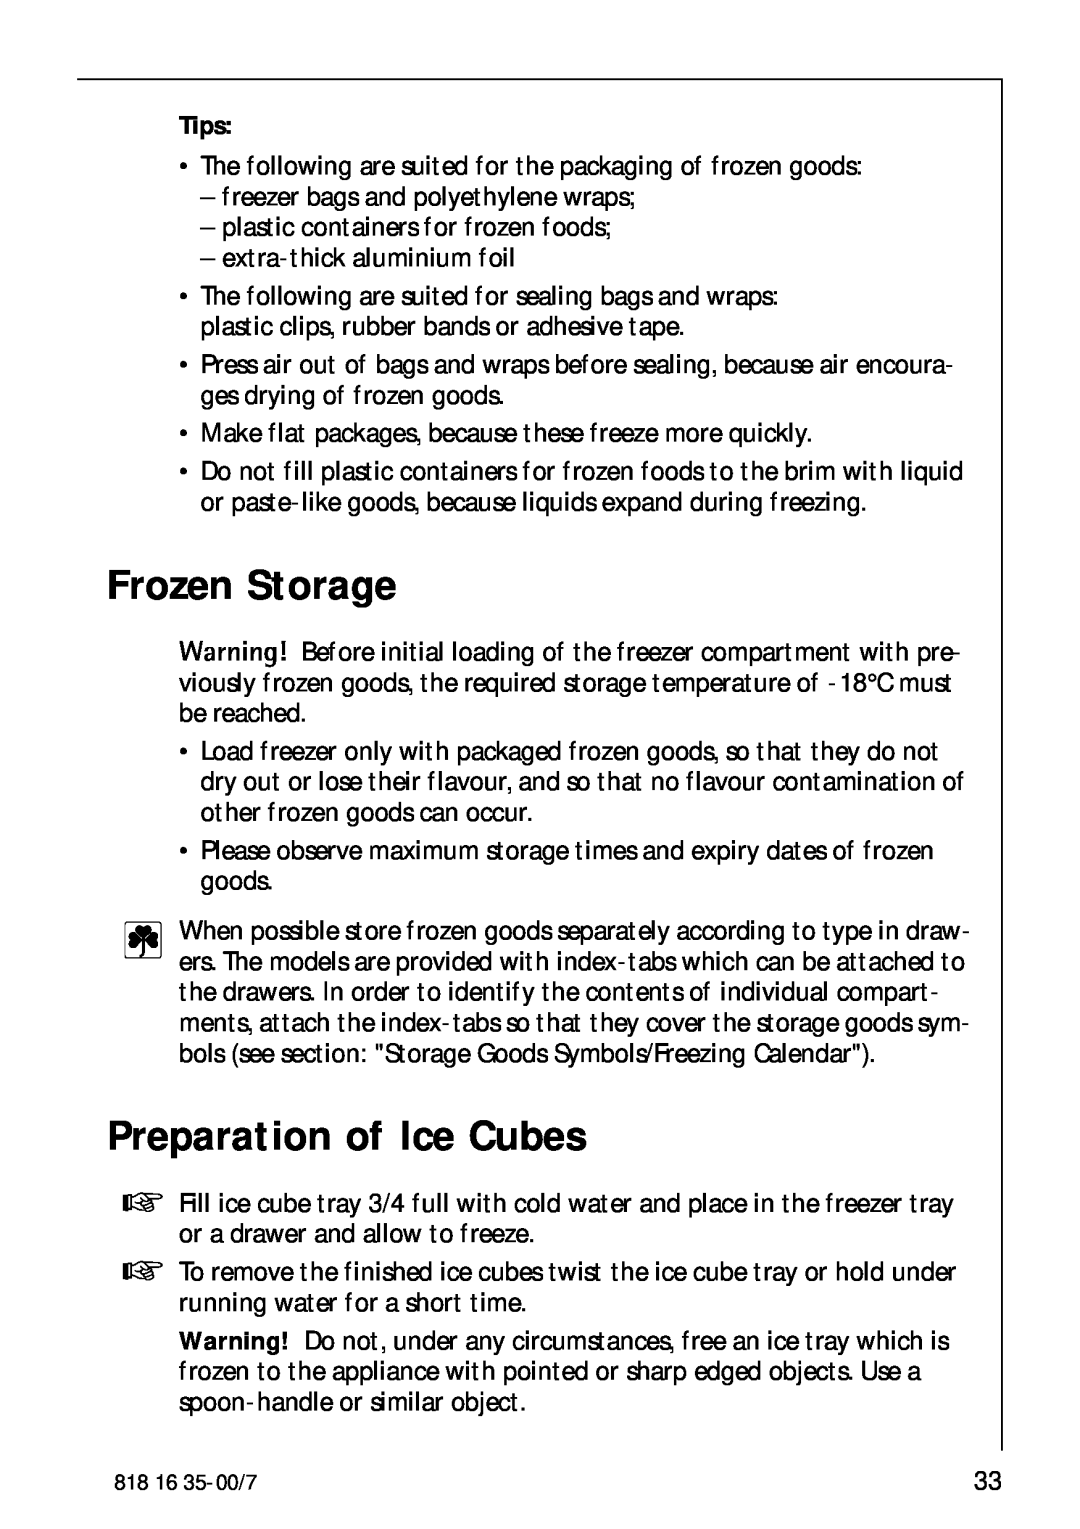 Electrolux KO_SANTO 4085 operating instructions Frozen Storage, Preparation of Ice Cubes, Tips 